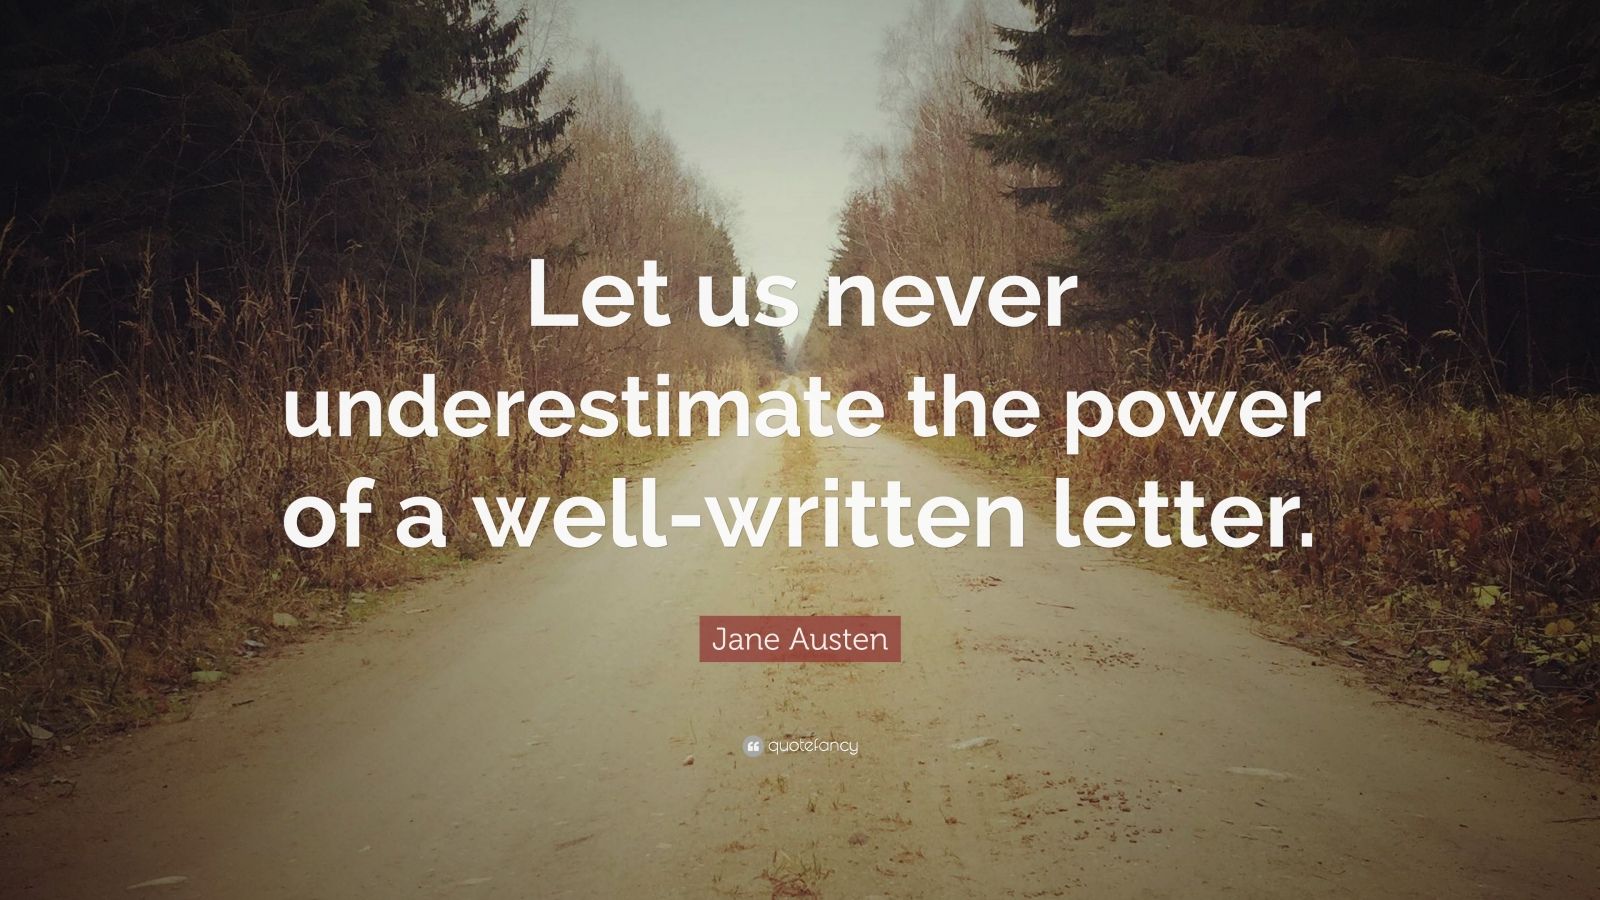 Jane Austen Quote: “Let us never underestimate the power of a well